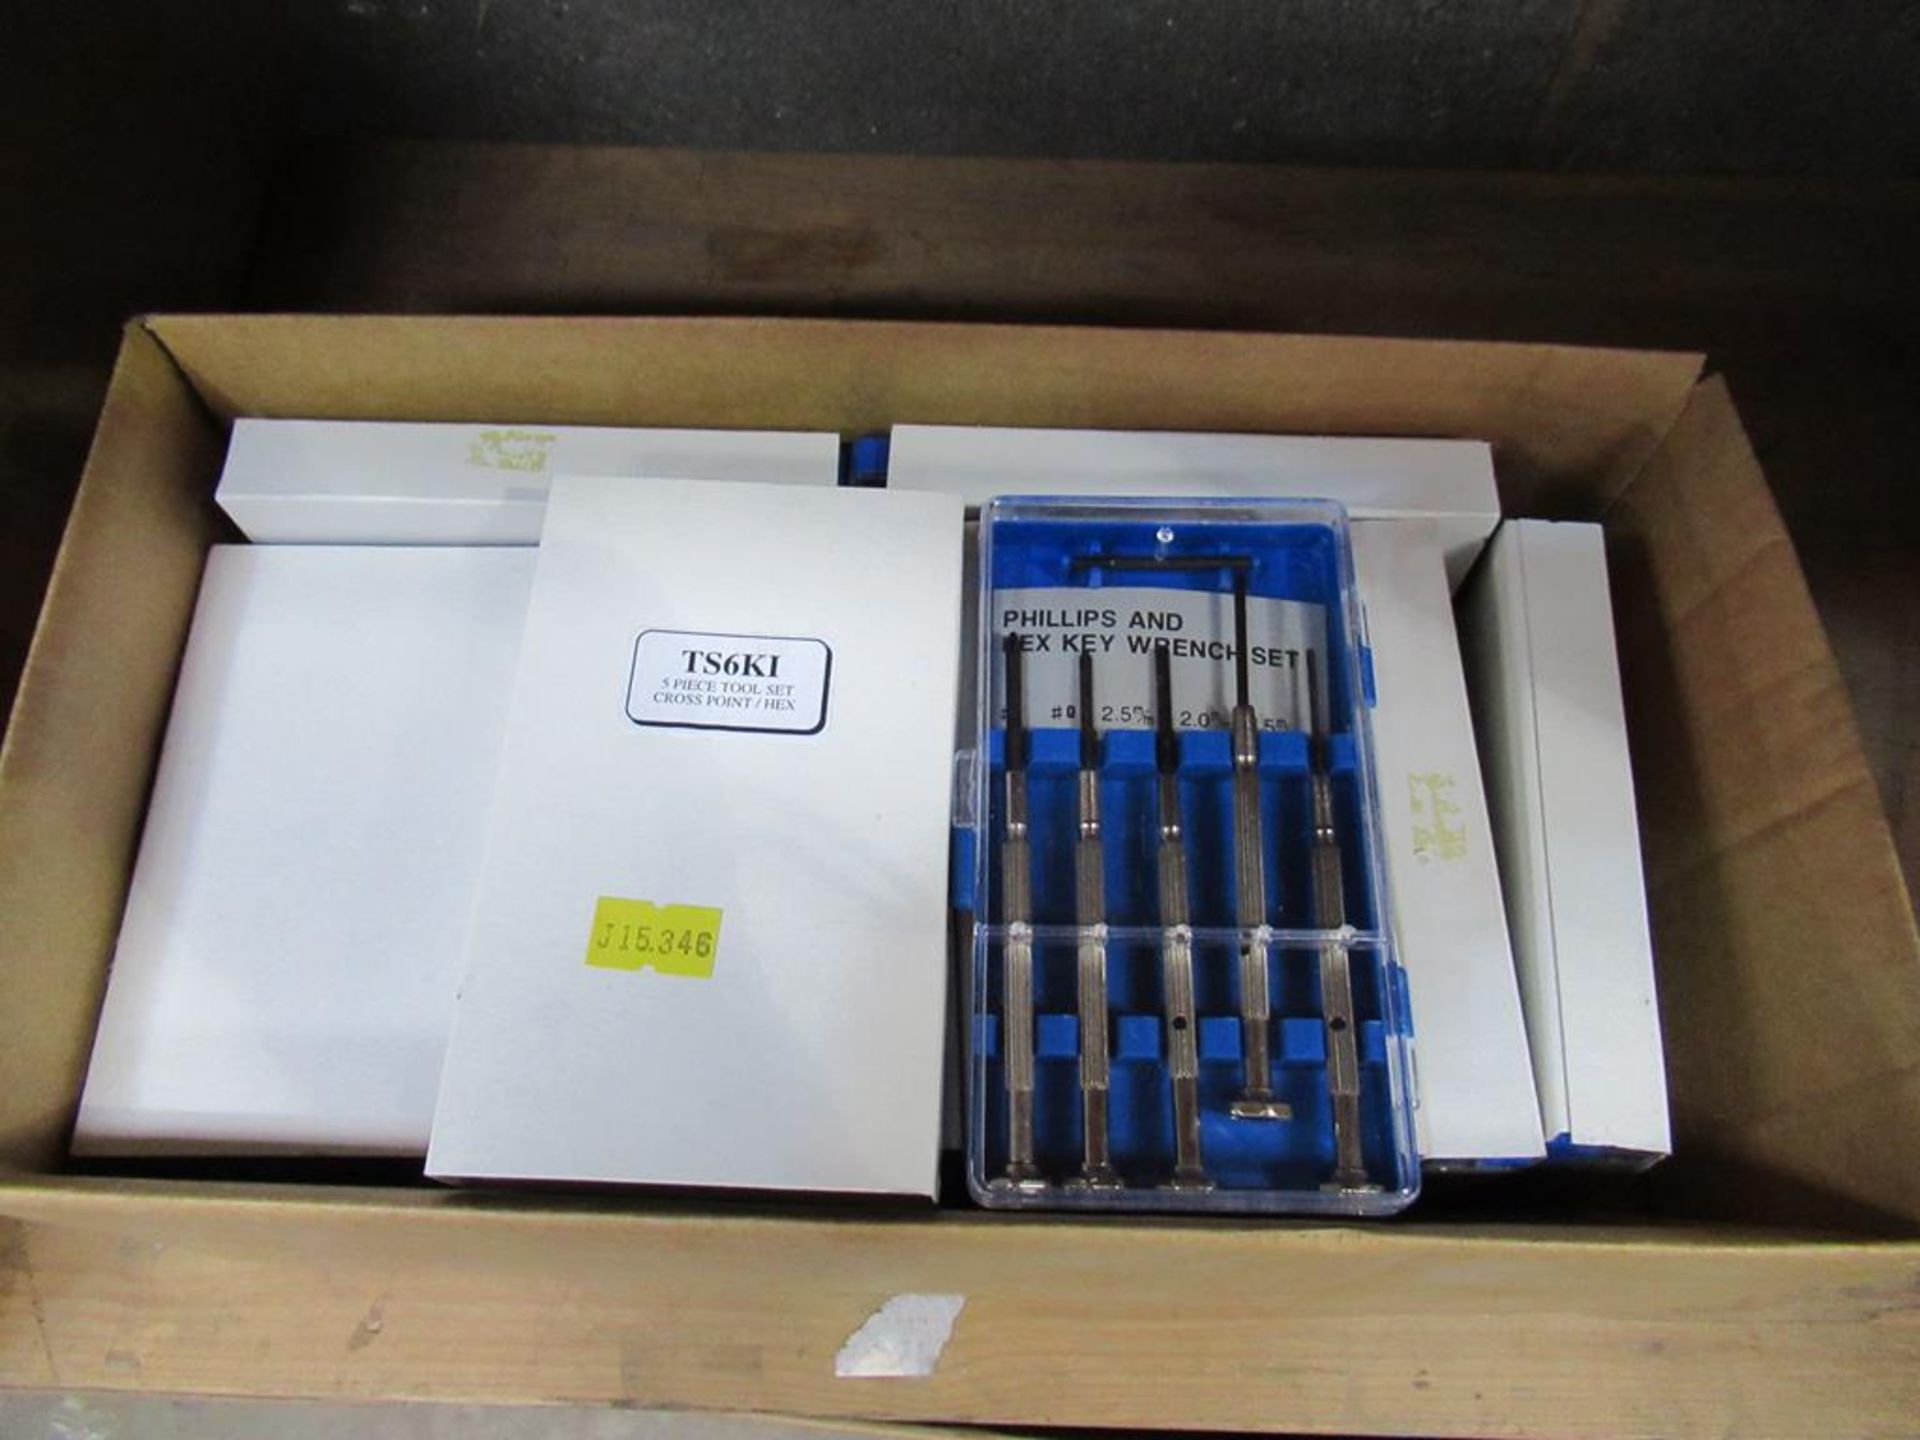 2x Boxes of Hand Tools, Circuit Testers and 5 Piece Tool Sets "Crosspoint/Mex" - Image 5 of 6